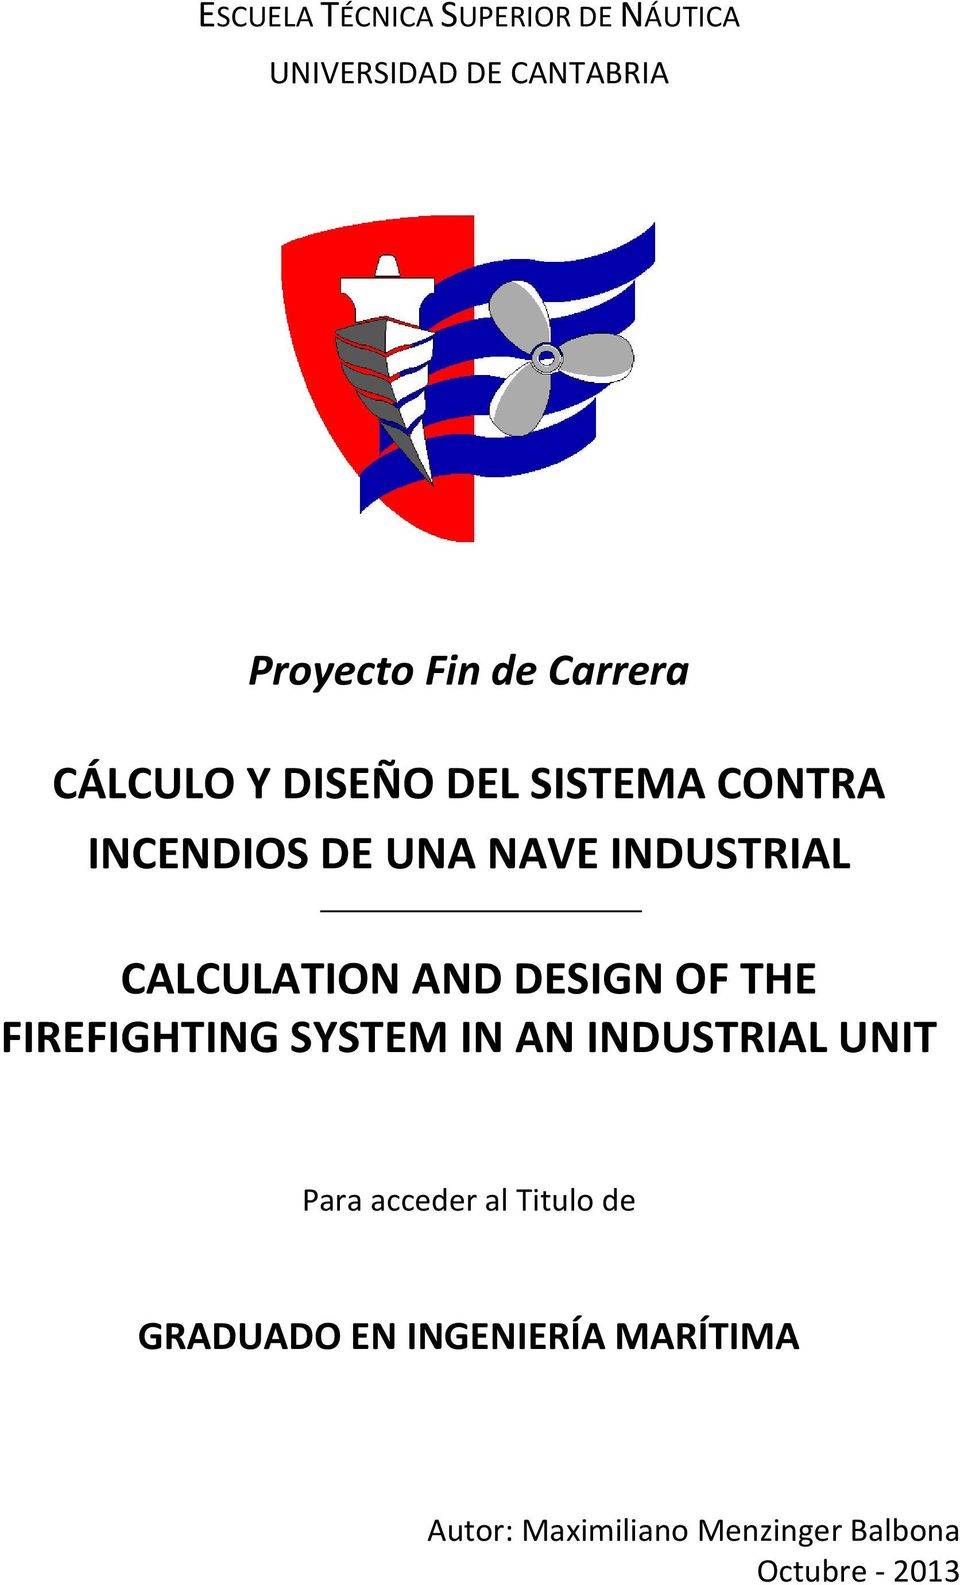 INDUSTRIAL CALCULATION AND DESIGN OF THE FIREFIGHTING SYSTEM IN AN